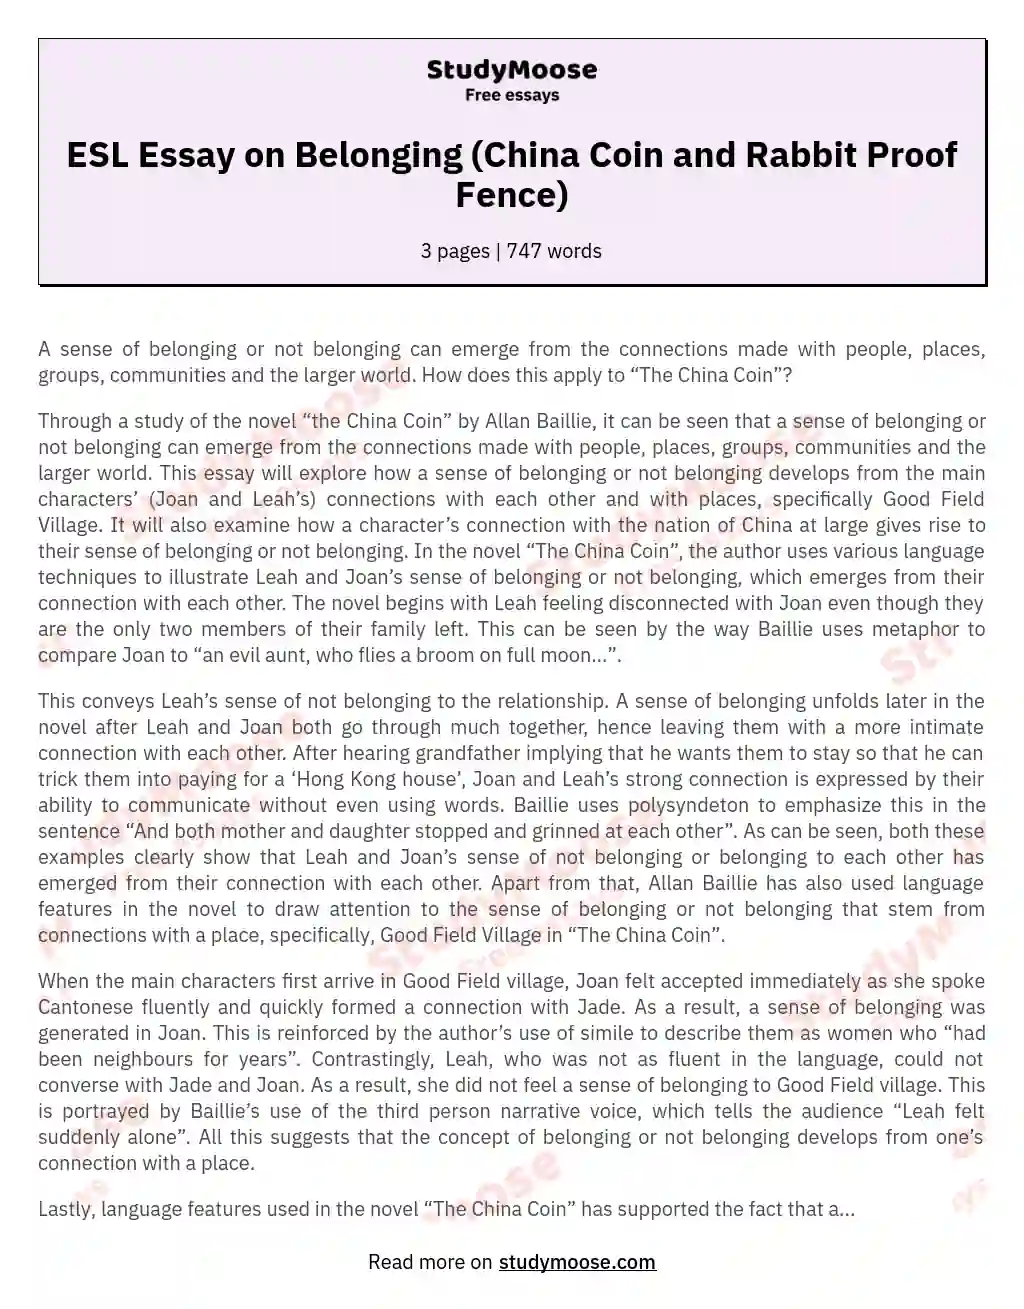 ESL Essay on Belonging (China Coin and Rabbit Proof Fence)